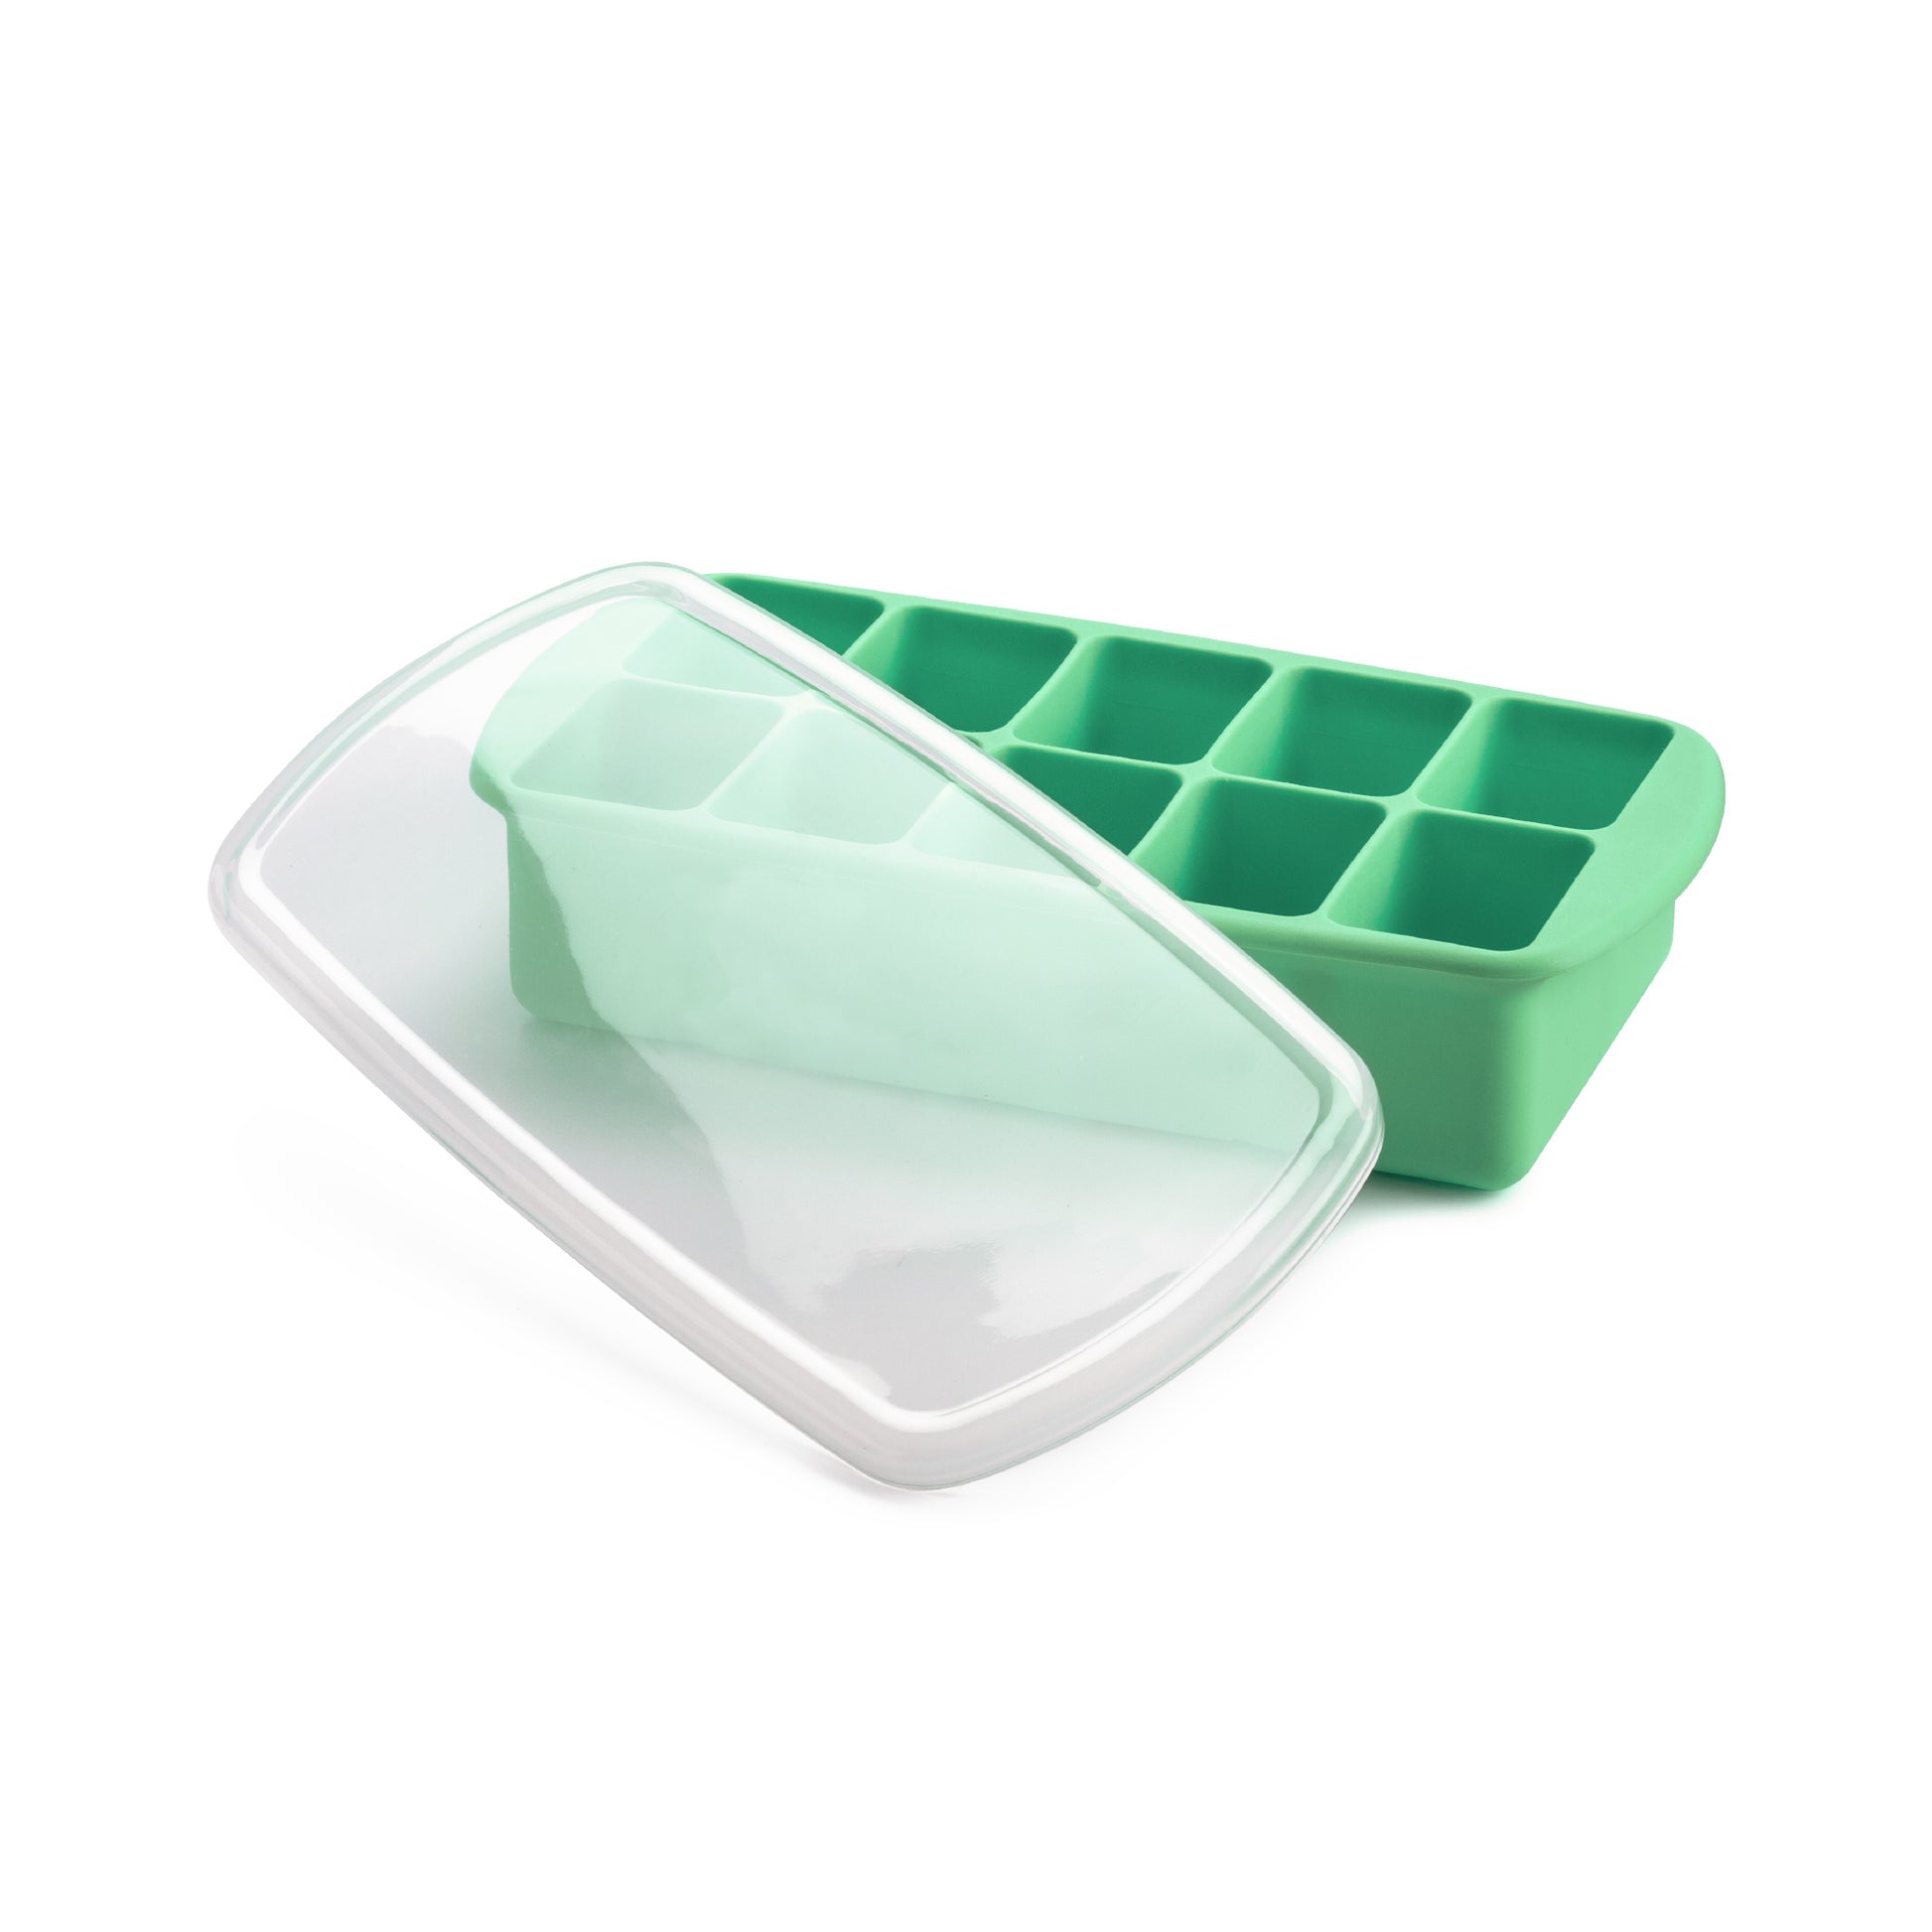 melii Baby Food Prep Silicone Tray with Lid Mint - BPA-Free, Versatile, Stackable for Convenient Freezing and Odor Protection